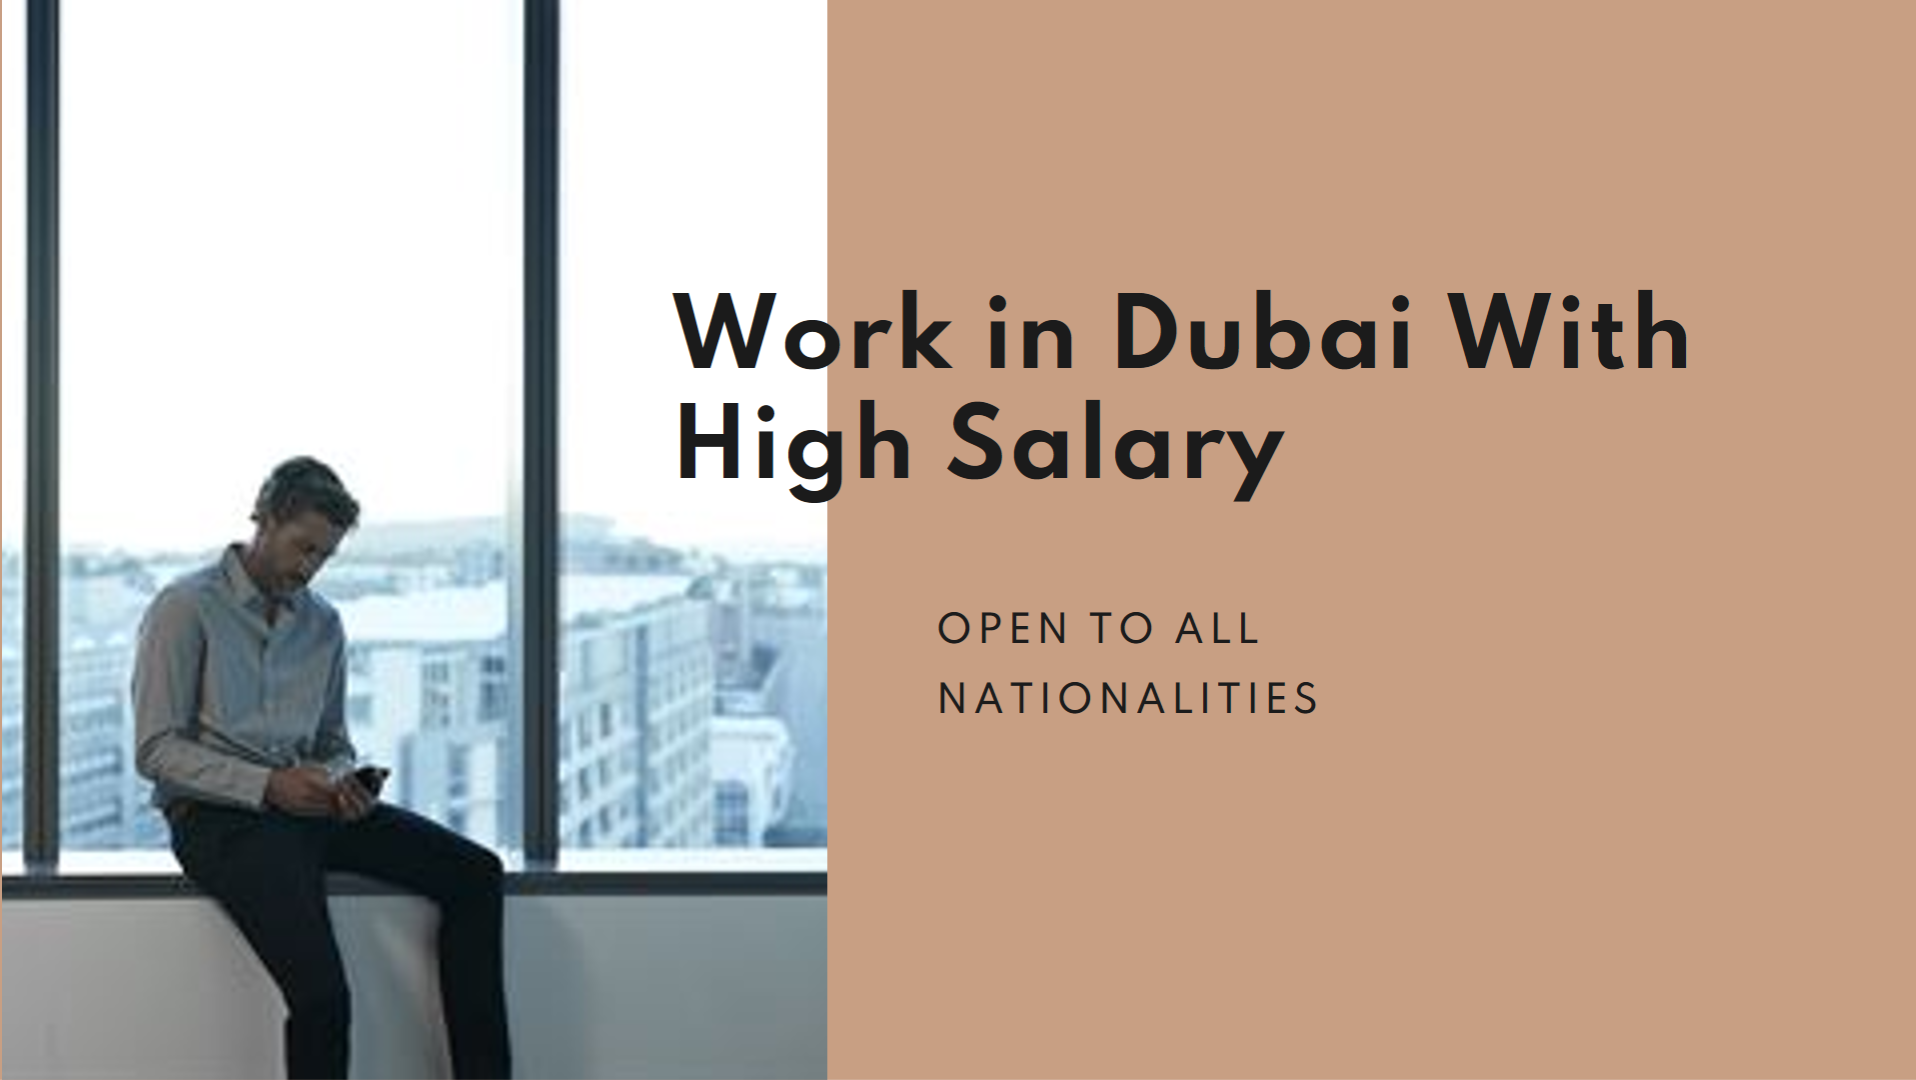 work in dubai for all nationalities with salary 20,000 to 25,000 AED